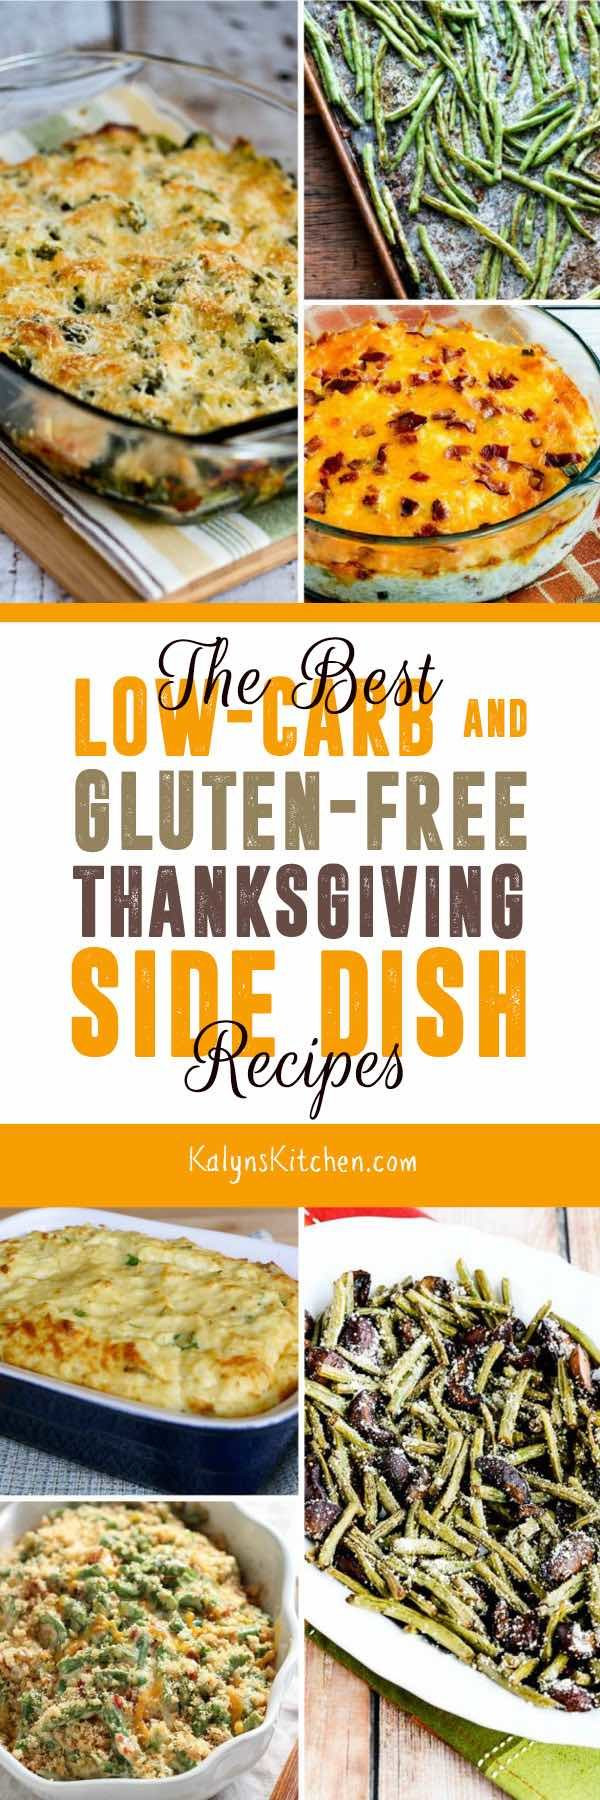 Low Carb Thanksgiving Recipes
 The BEST Low Carb and Gluten Free Thanksgiving Side Dish